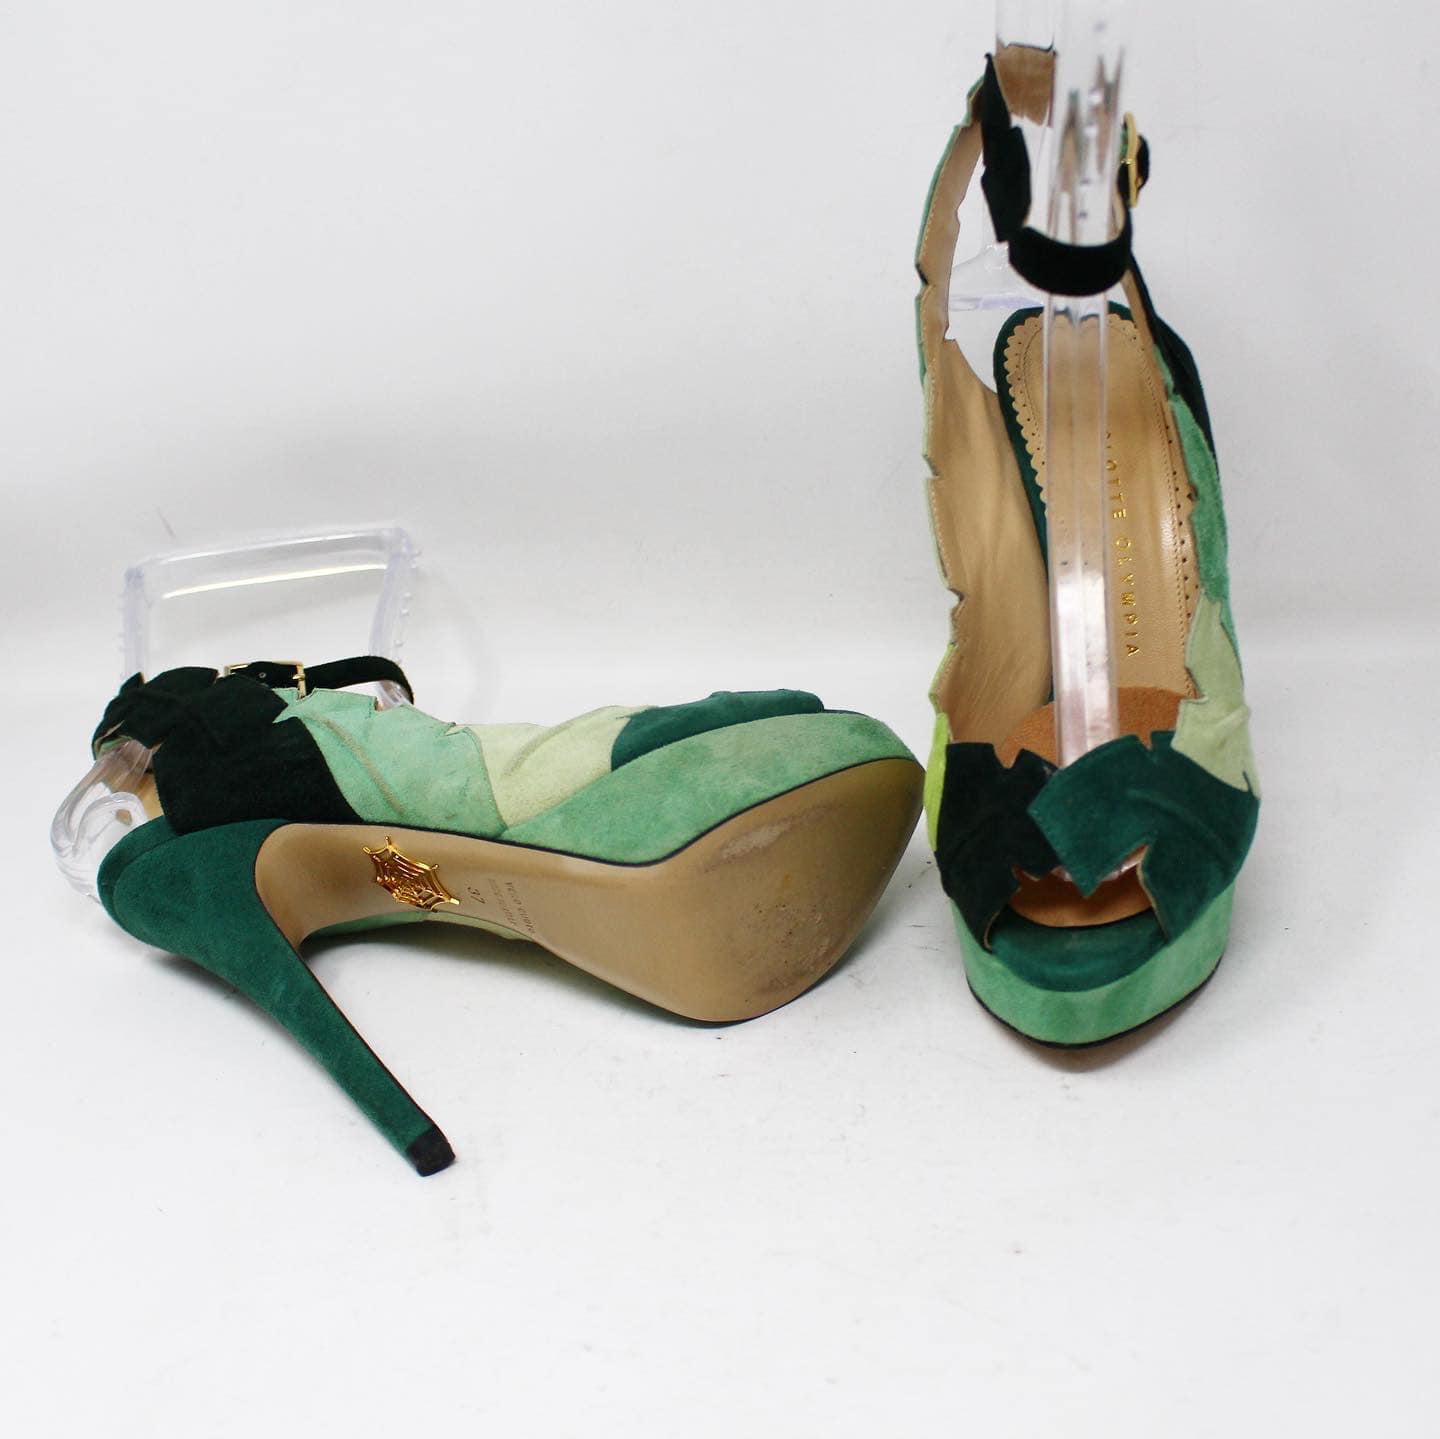 CHARLOTTE OLYMPIA #44003 Suede Leaf Heels Size 37 – ALL YOUR BLISS